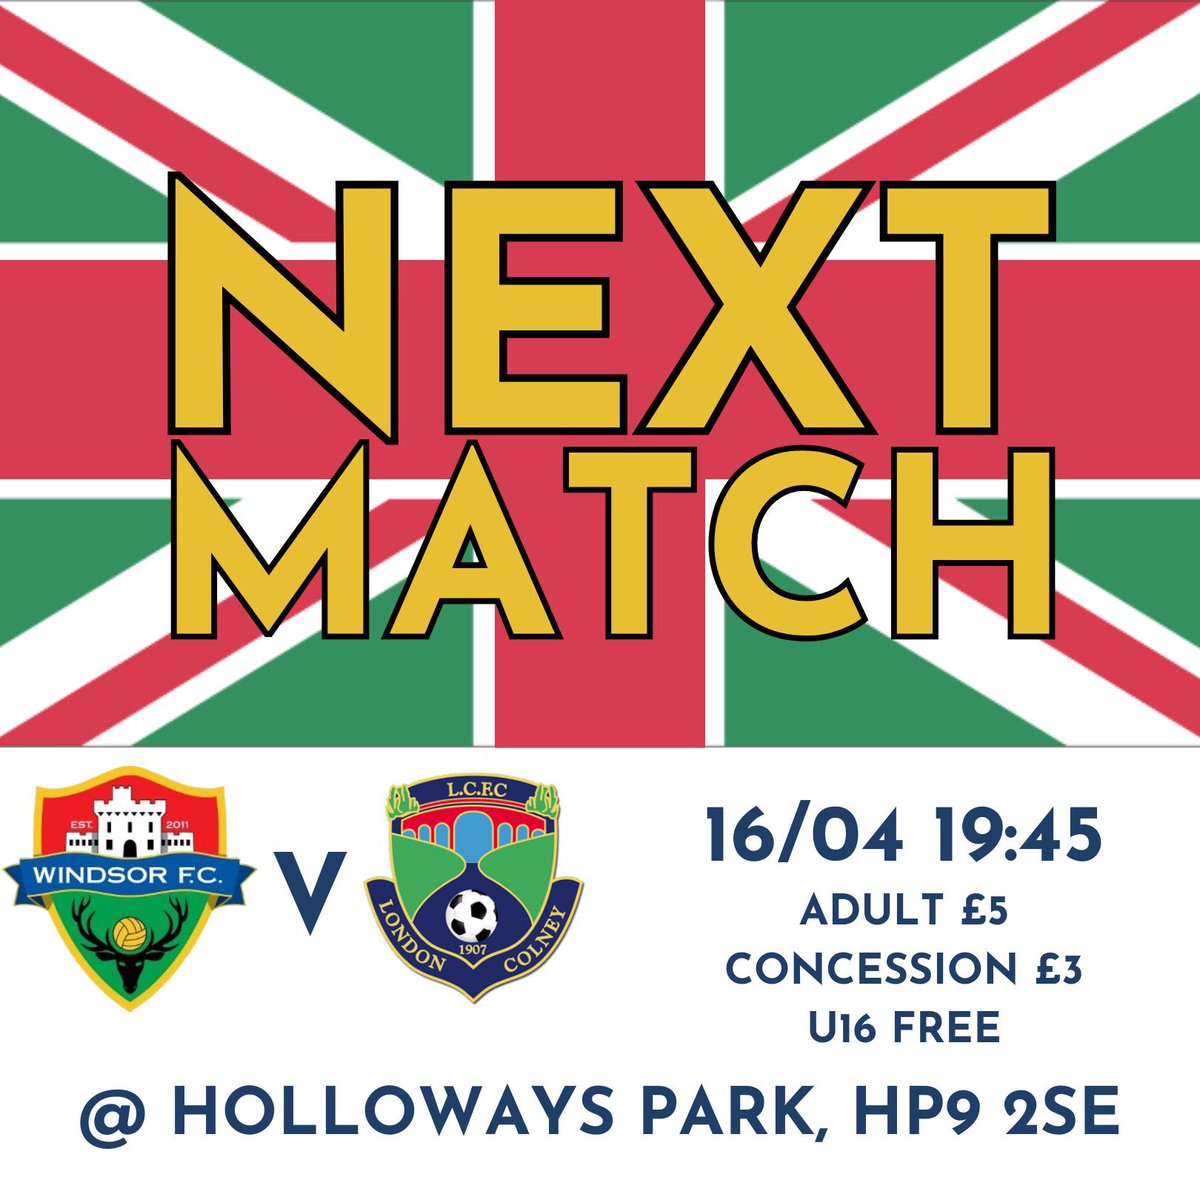 It’s match night! 🌙 Get yourself down to Holloways Park for some midweek football under the lights! 💡 🟥🟩